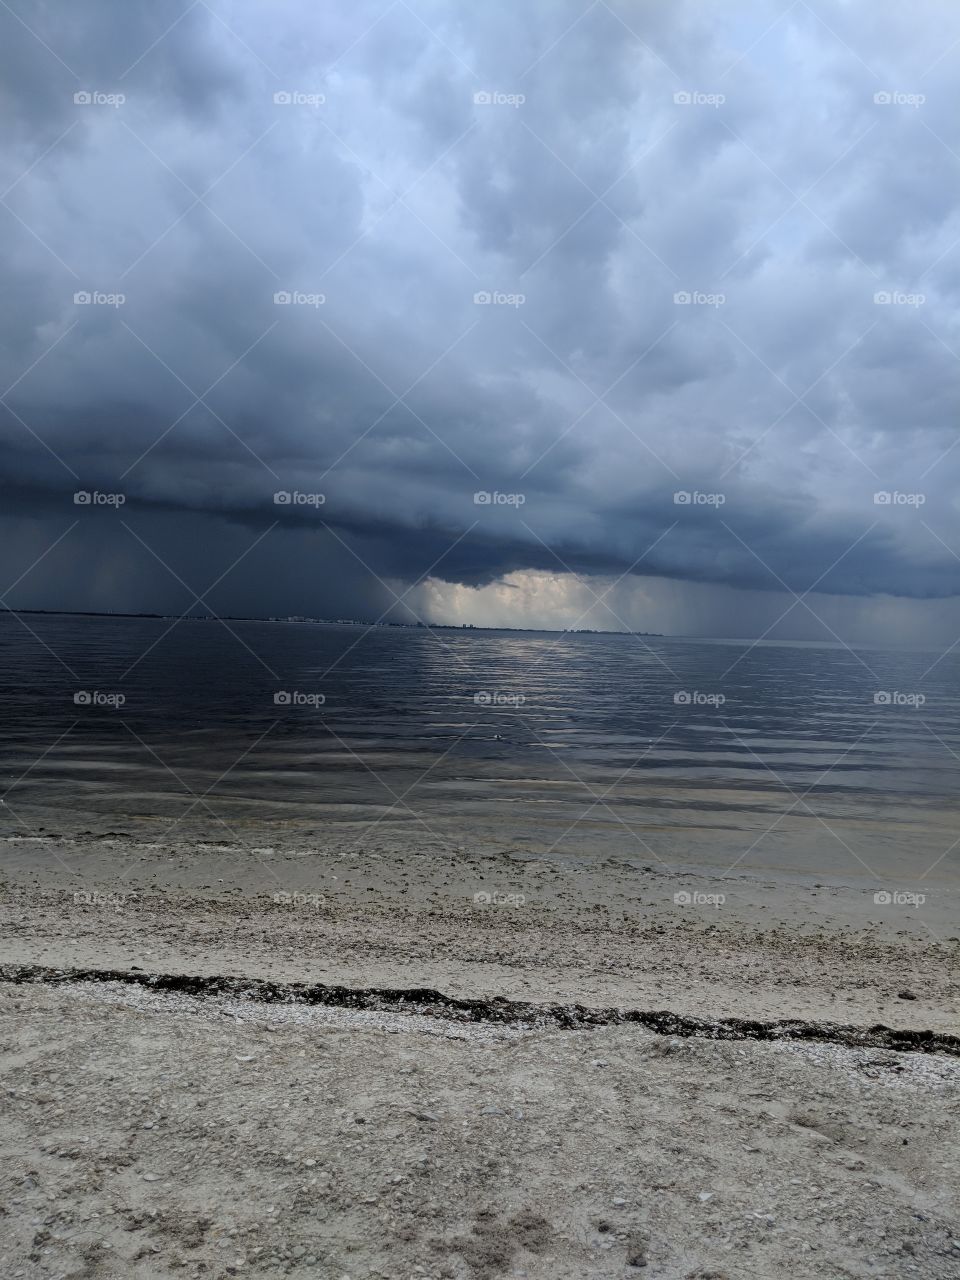 ominous clouds show one little area with good weather... look out! This is looking towards Ft Myers from the Sanibel Island causeway, Sanibel, FL.